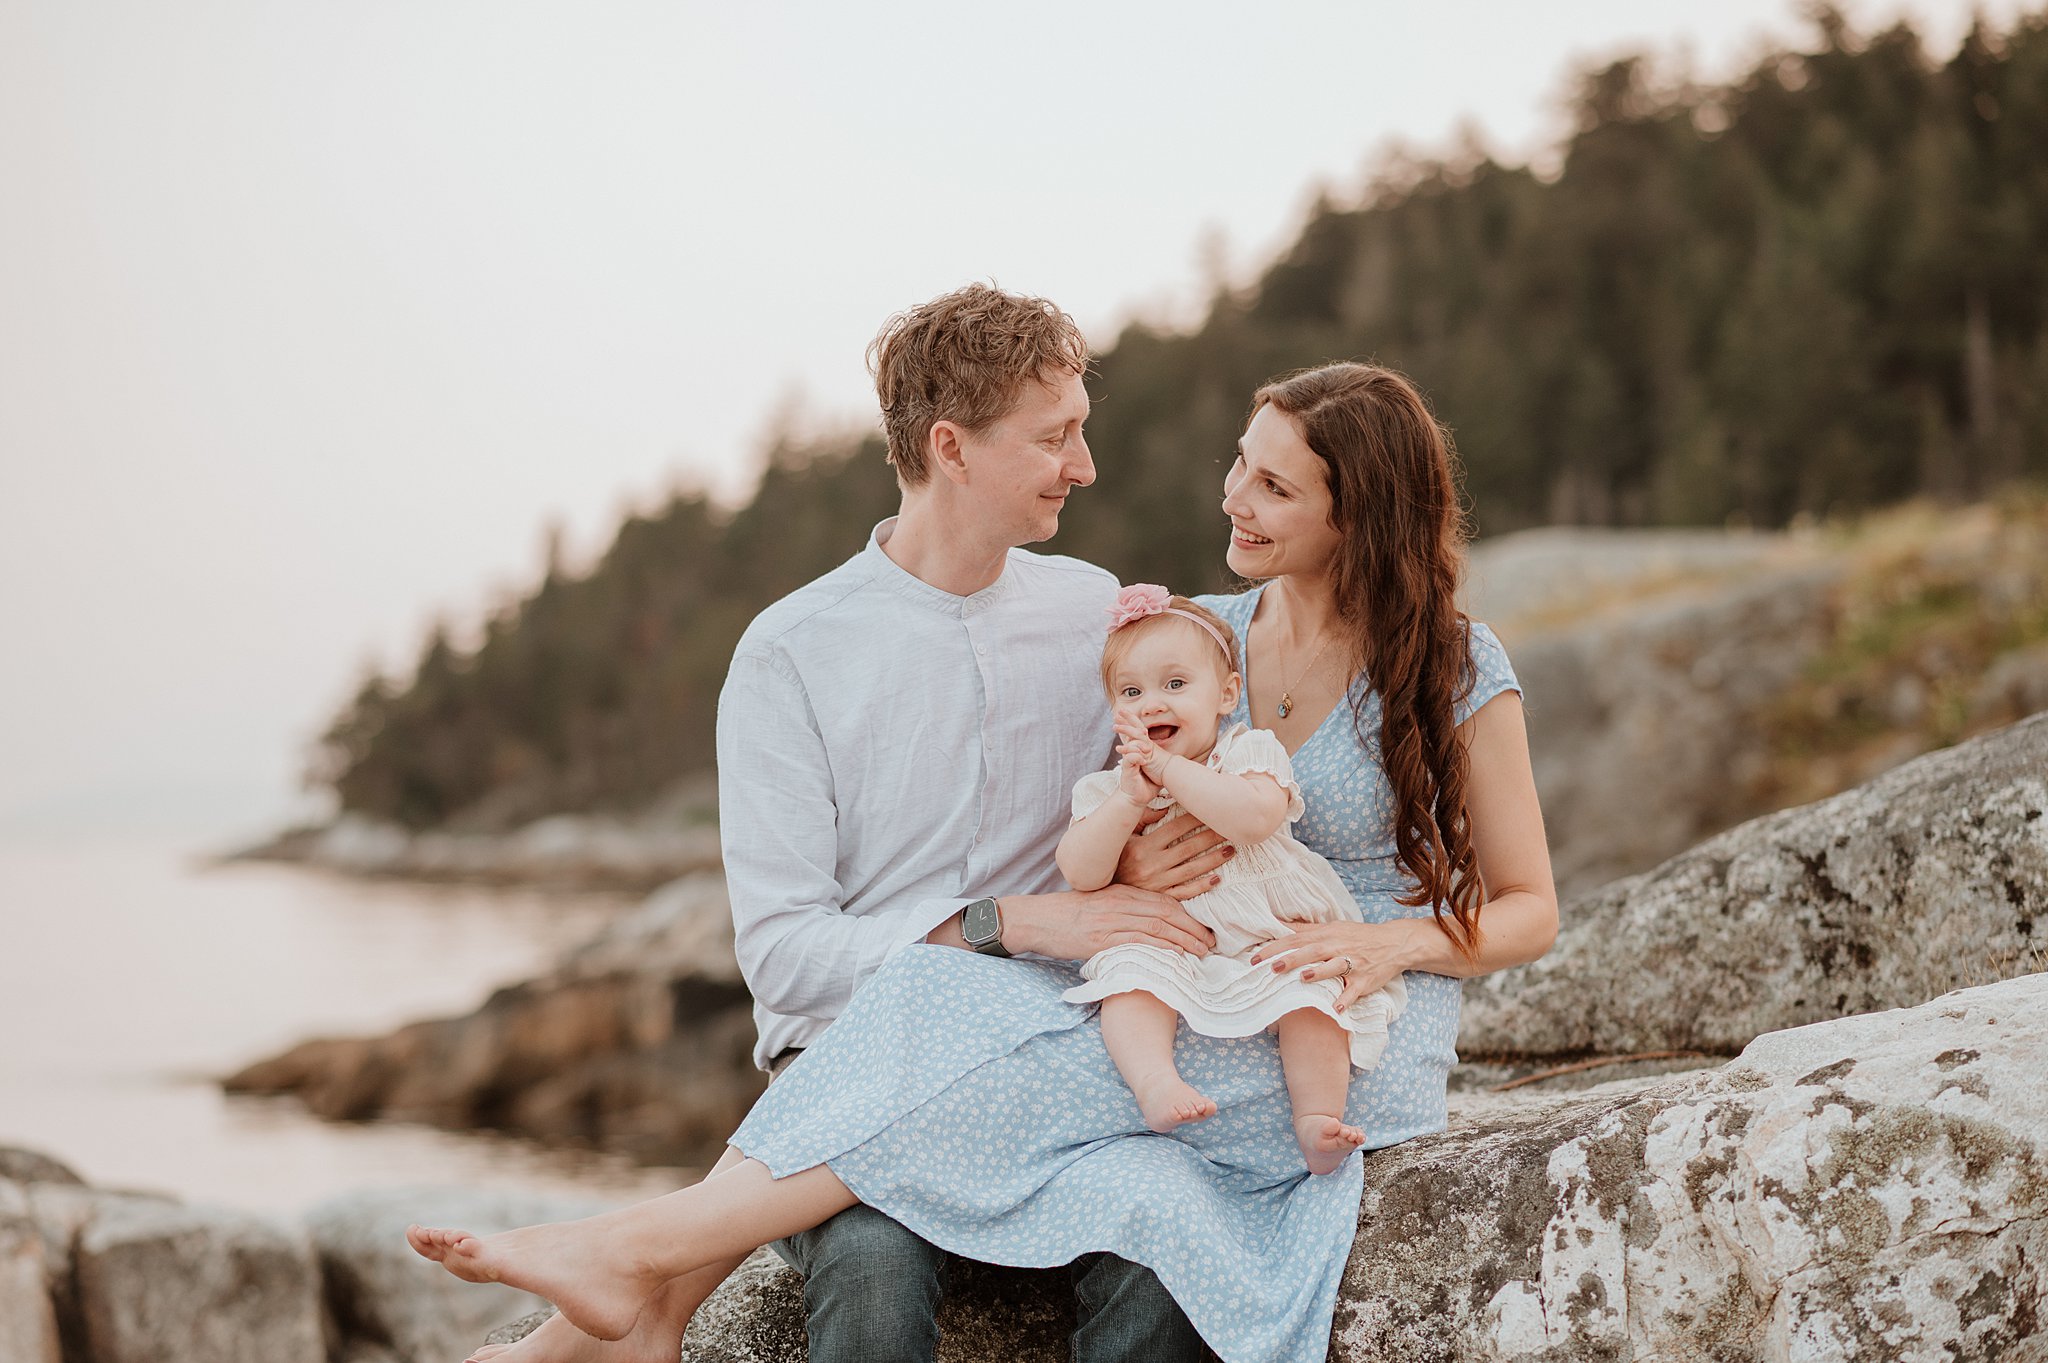 Happy parents smile at each other while sitting on a rock with their toddler daughter in mom's lap